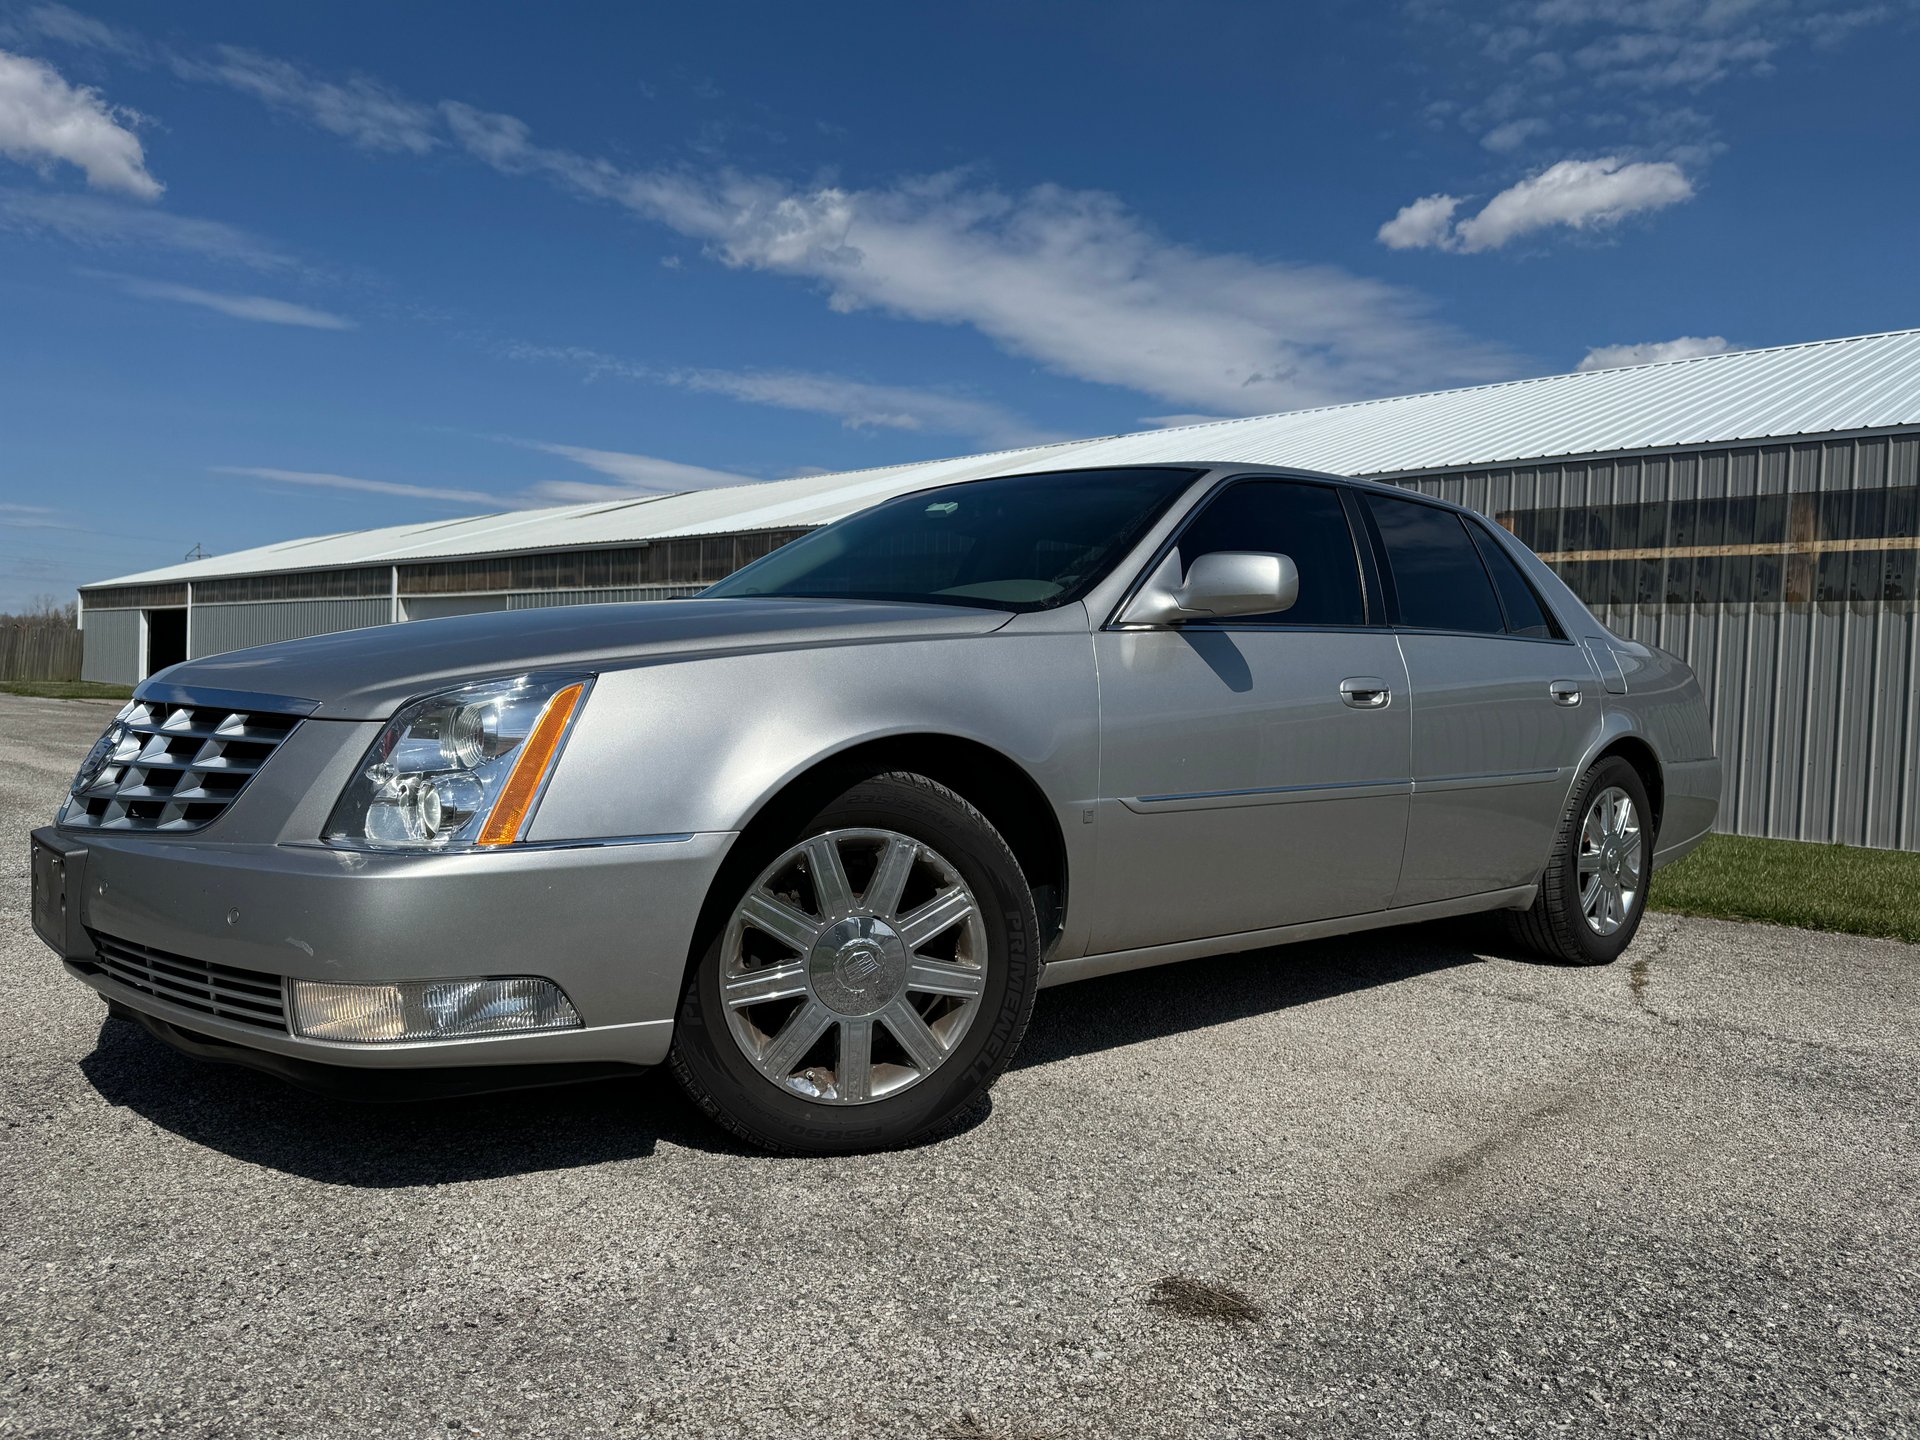 2006 Cadillac DTS | Country Classic Cars